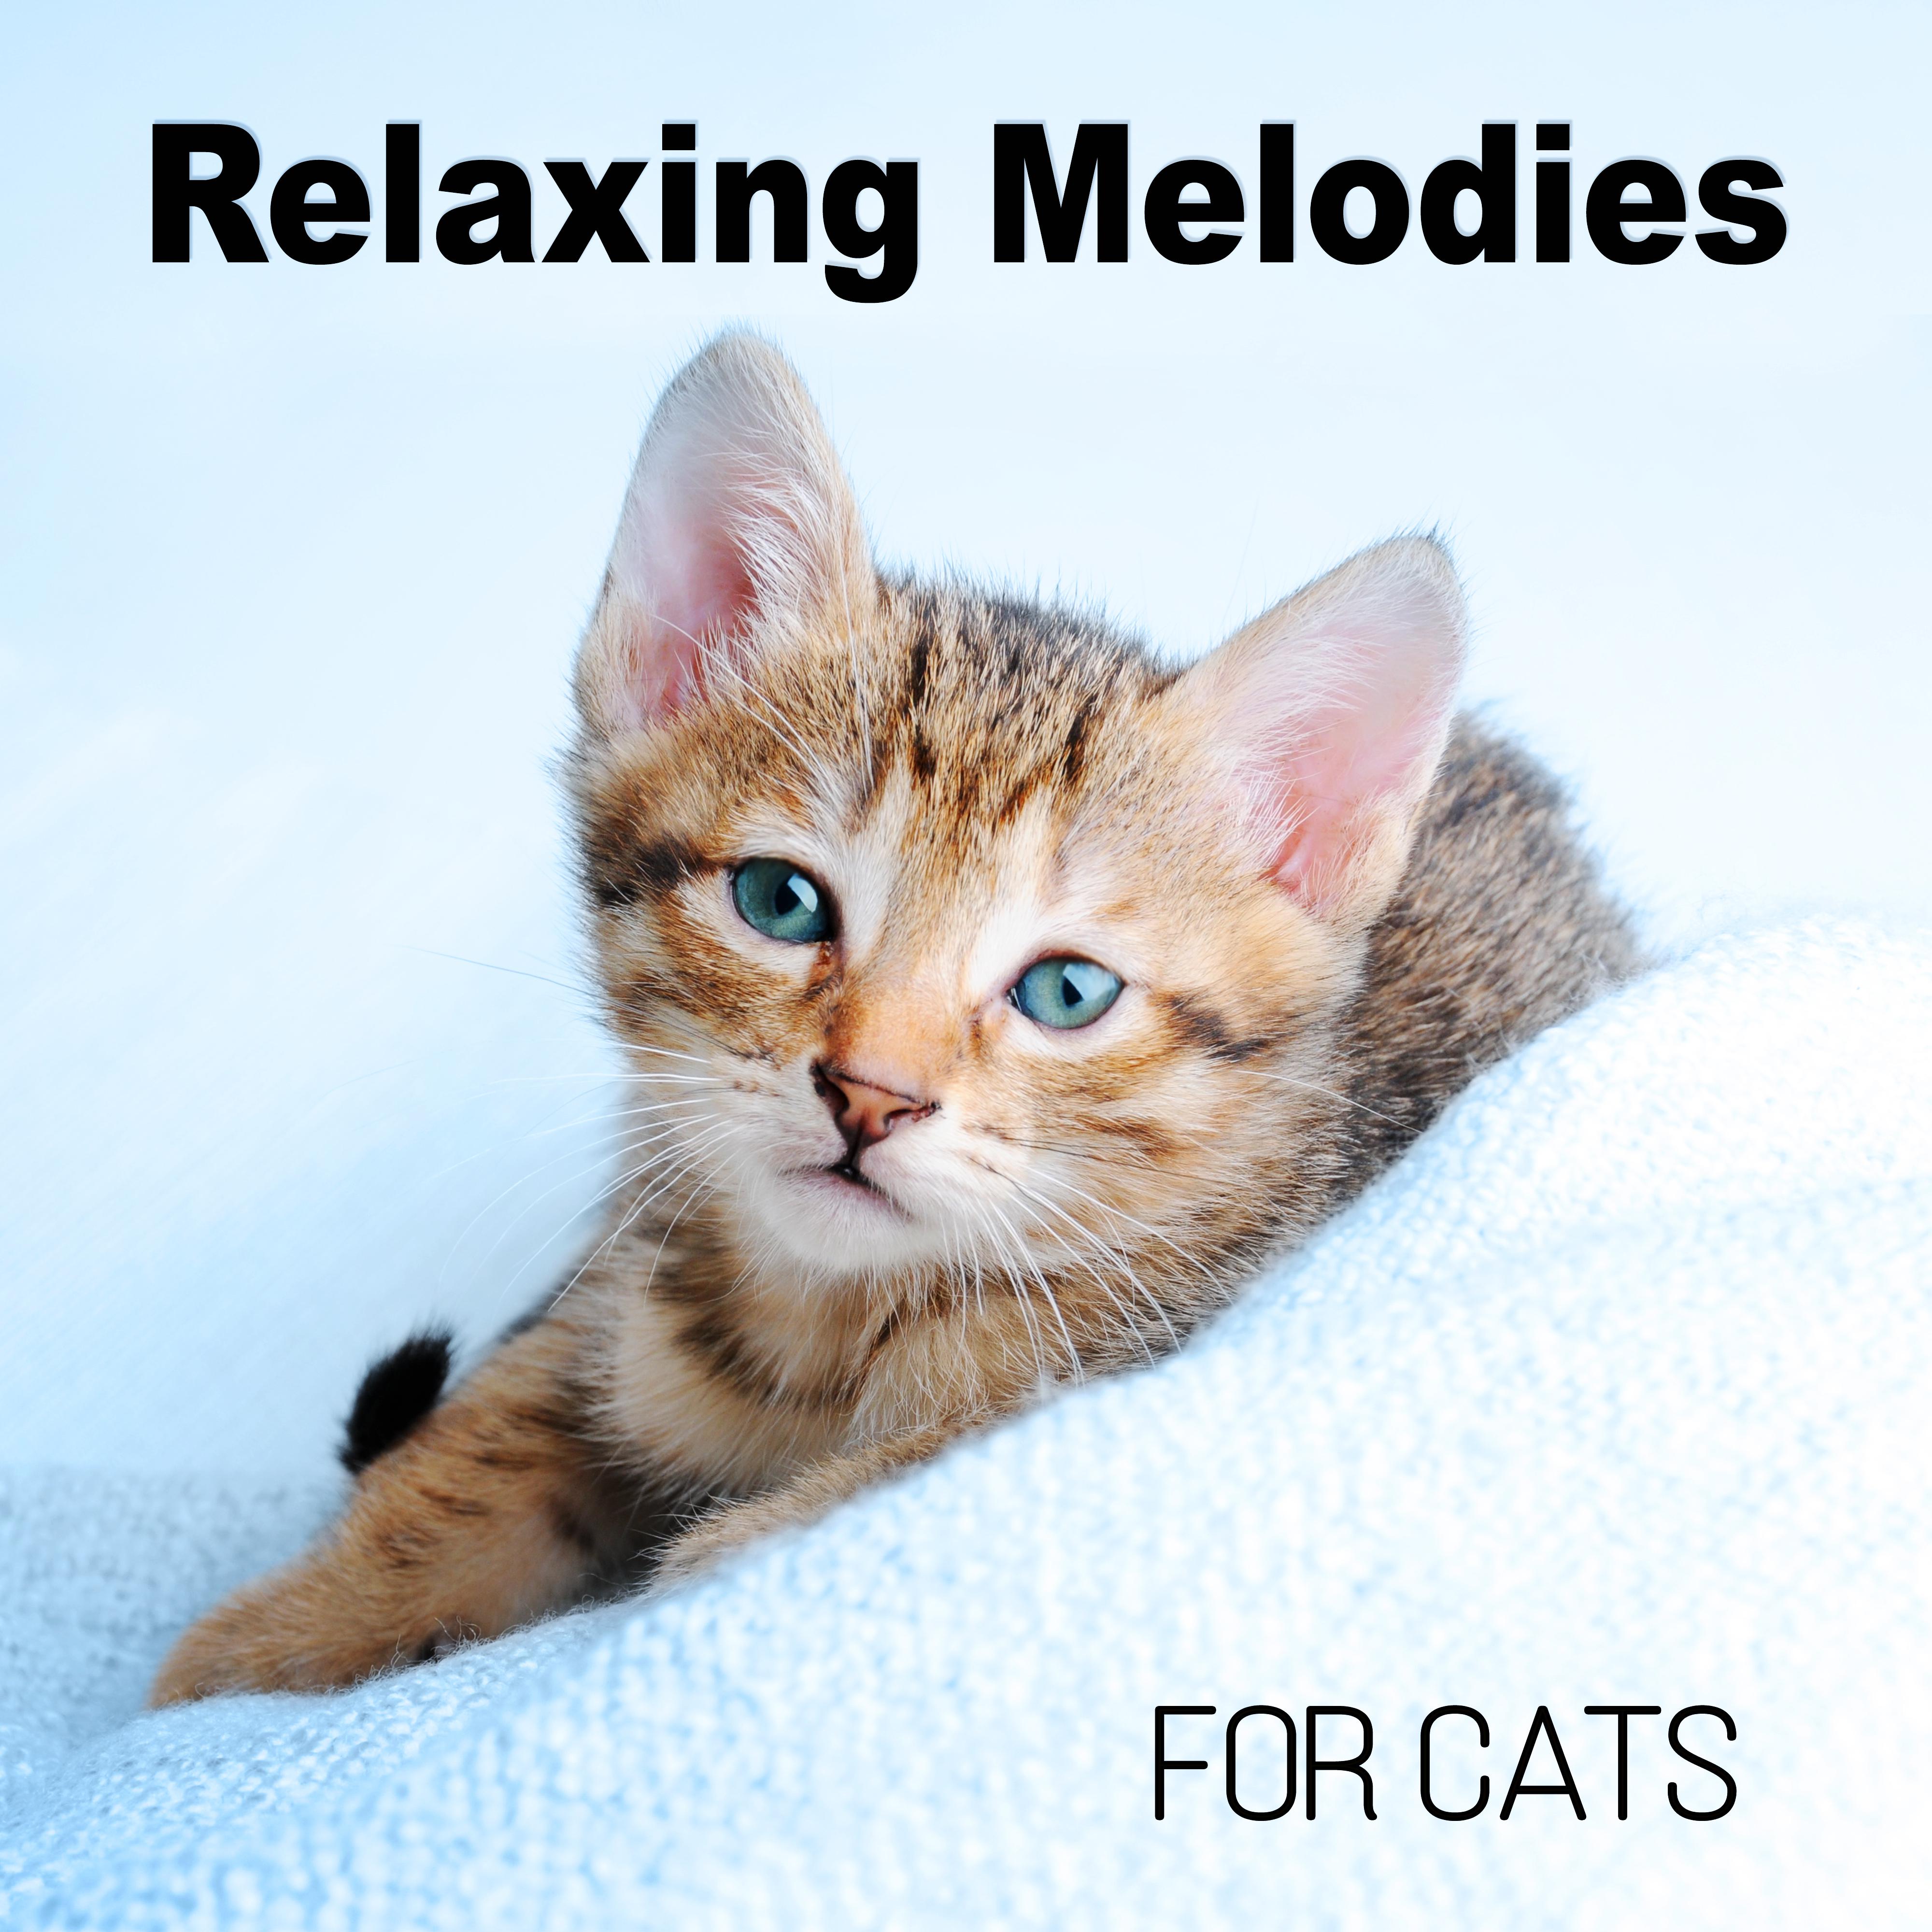 Relaxing Melodies for Cats - Relaxing Melodies to Calm Down Your Pet, Soothing Relaxation Music